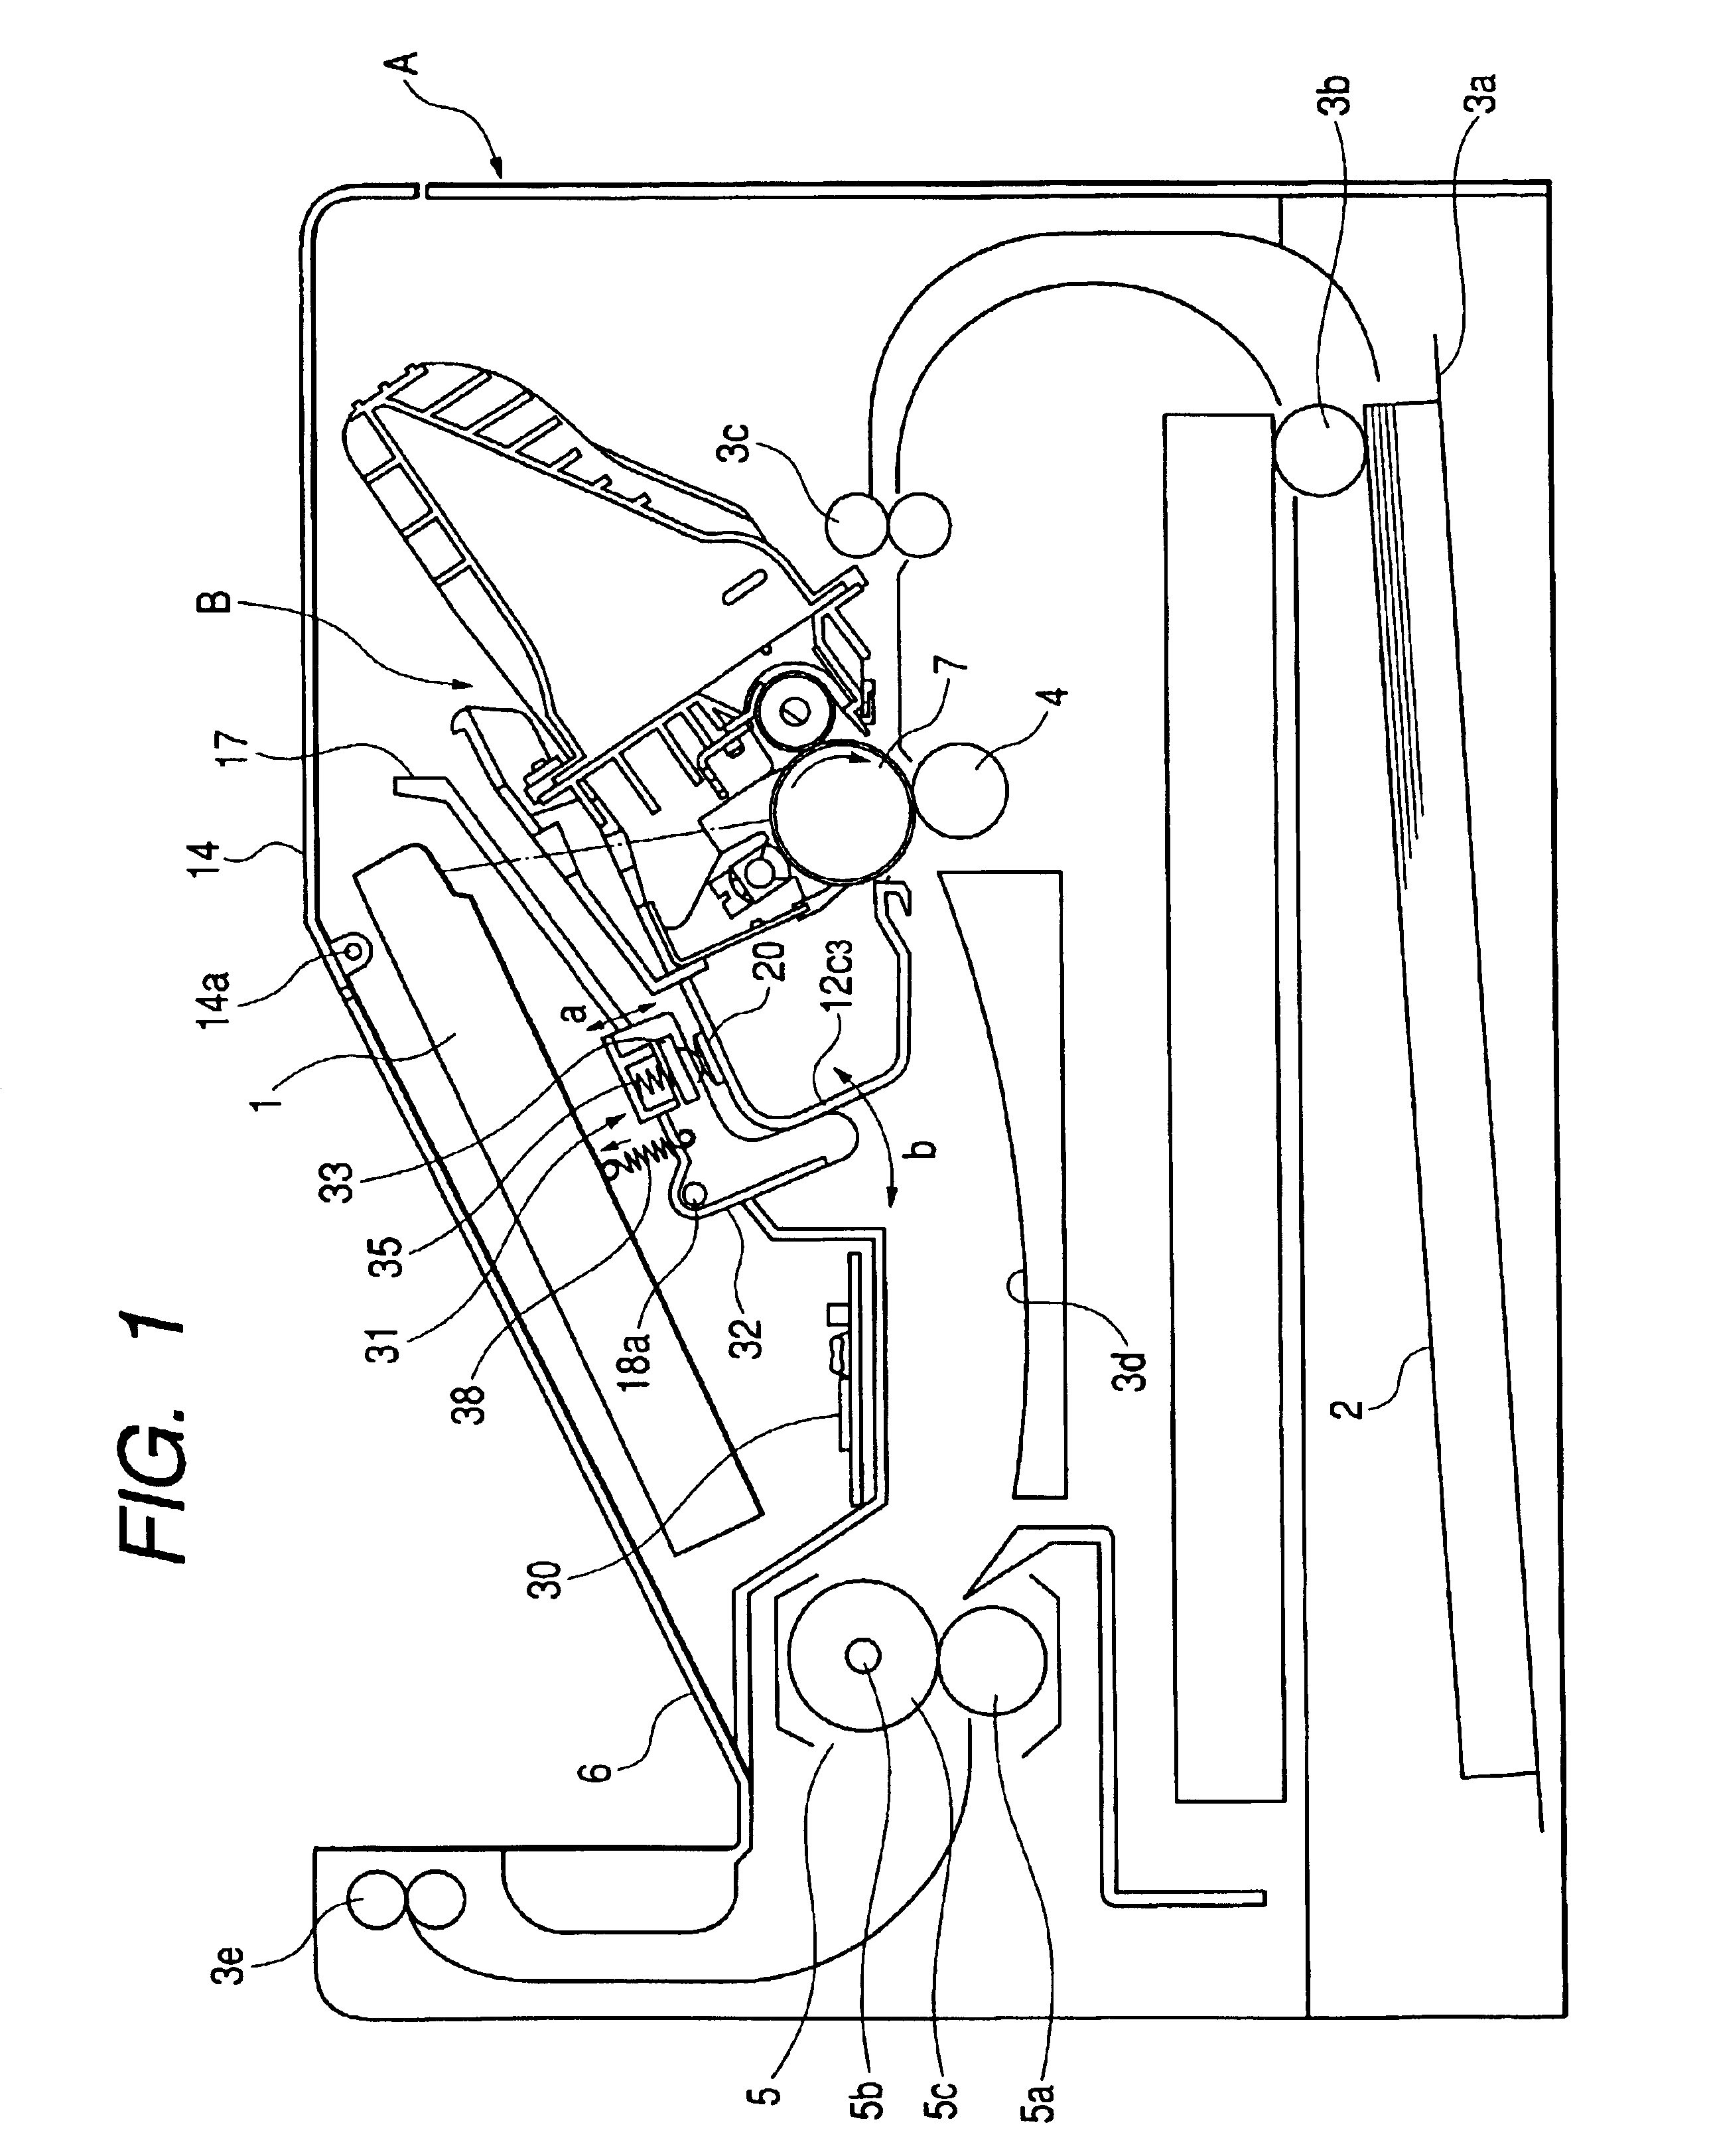 Process cartridge and electrophotographic image forming apparatus having electrical connection for memory